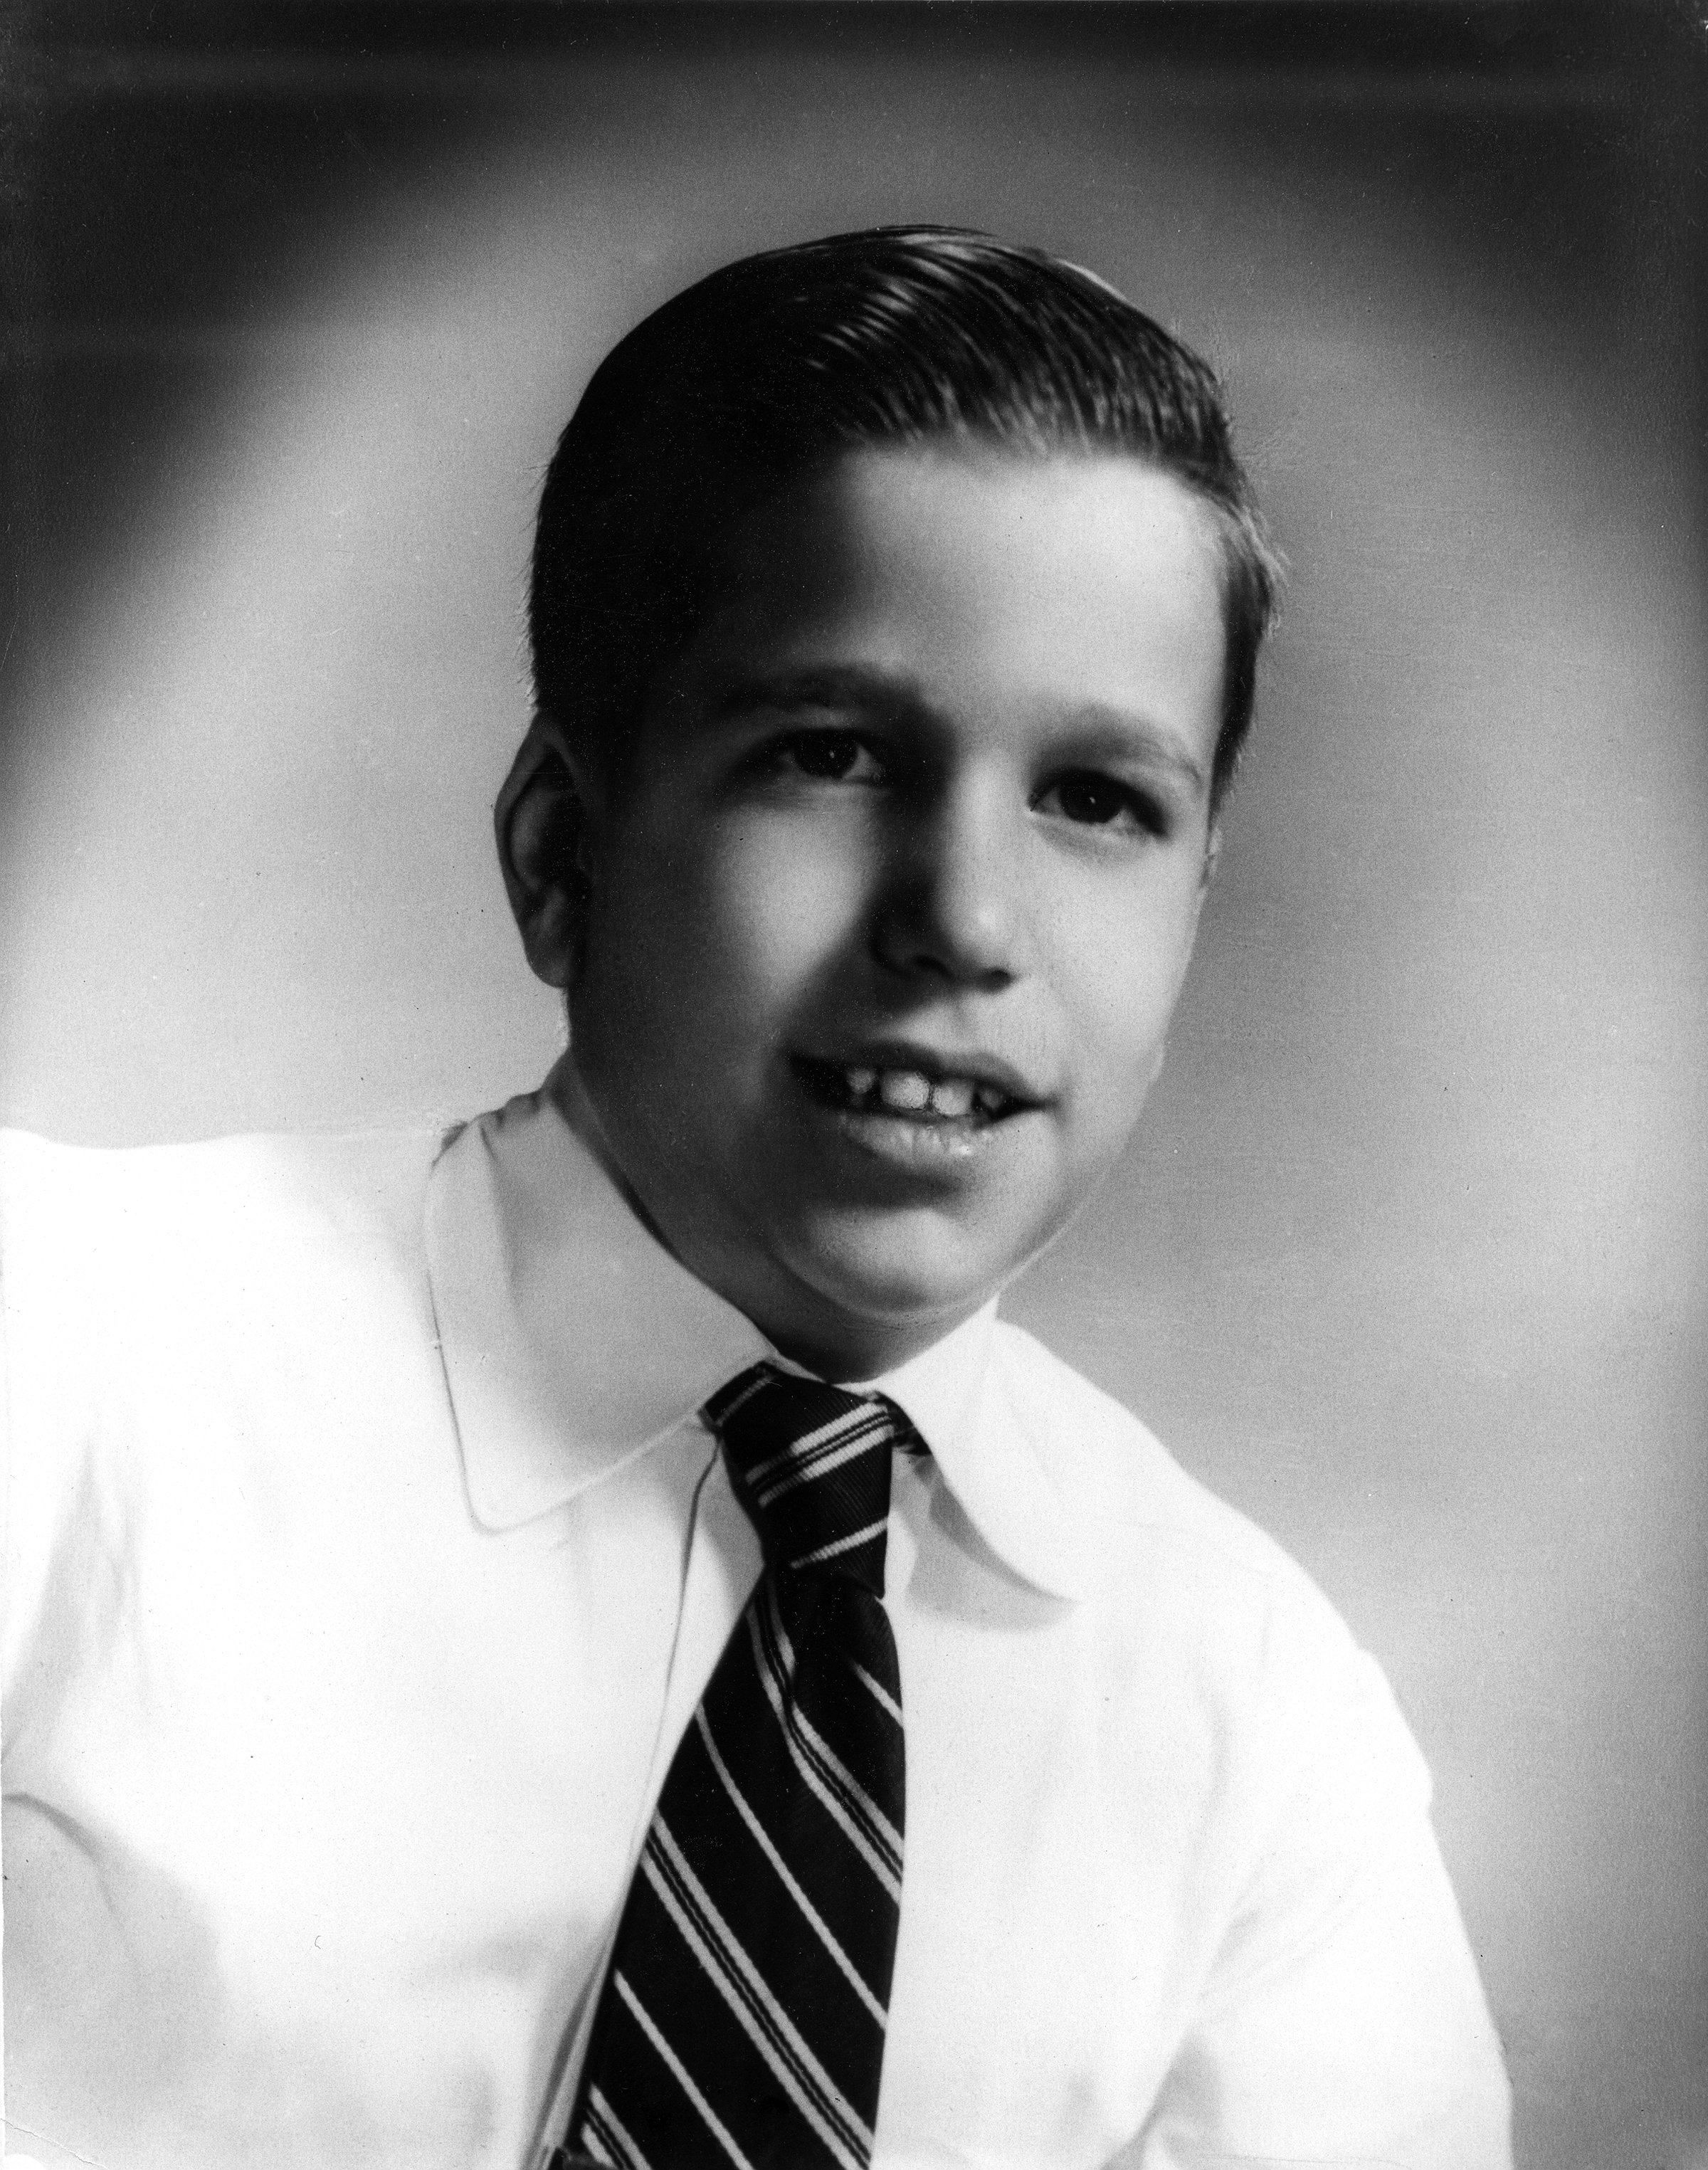 Henry Winkler photographed in circa 1970. | Source: Getty Images